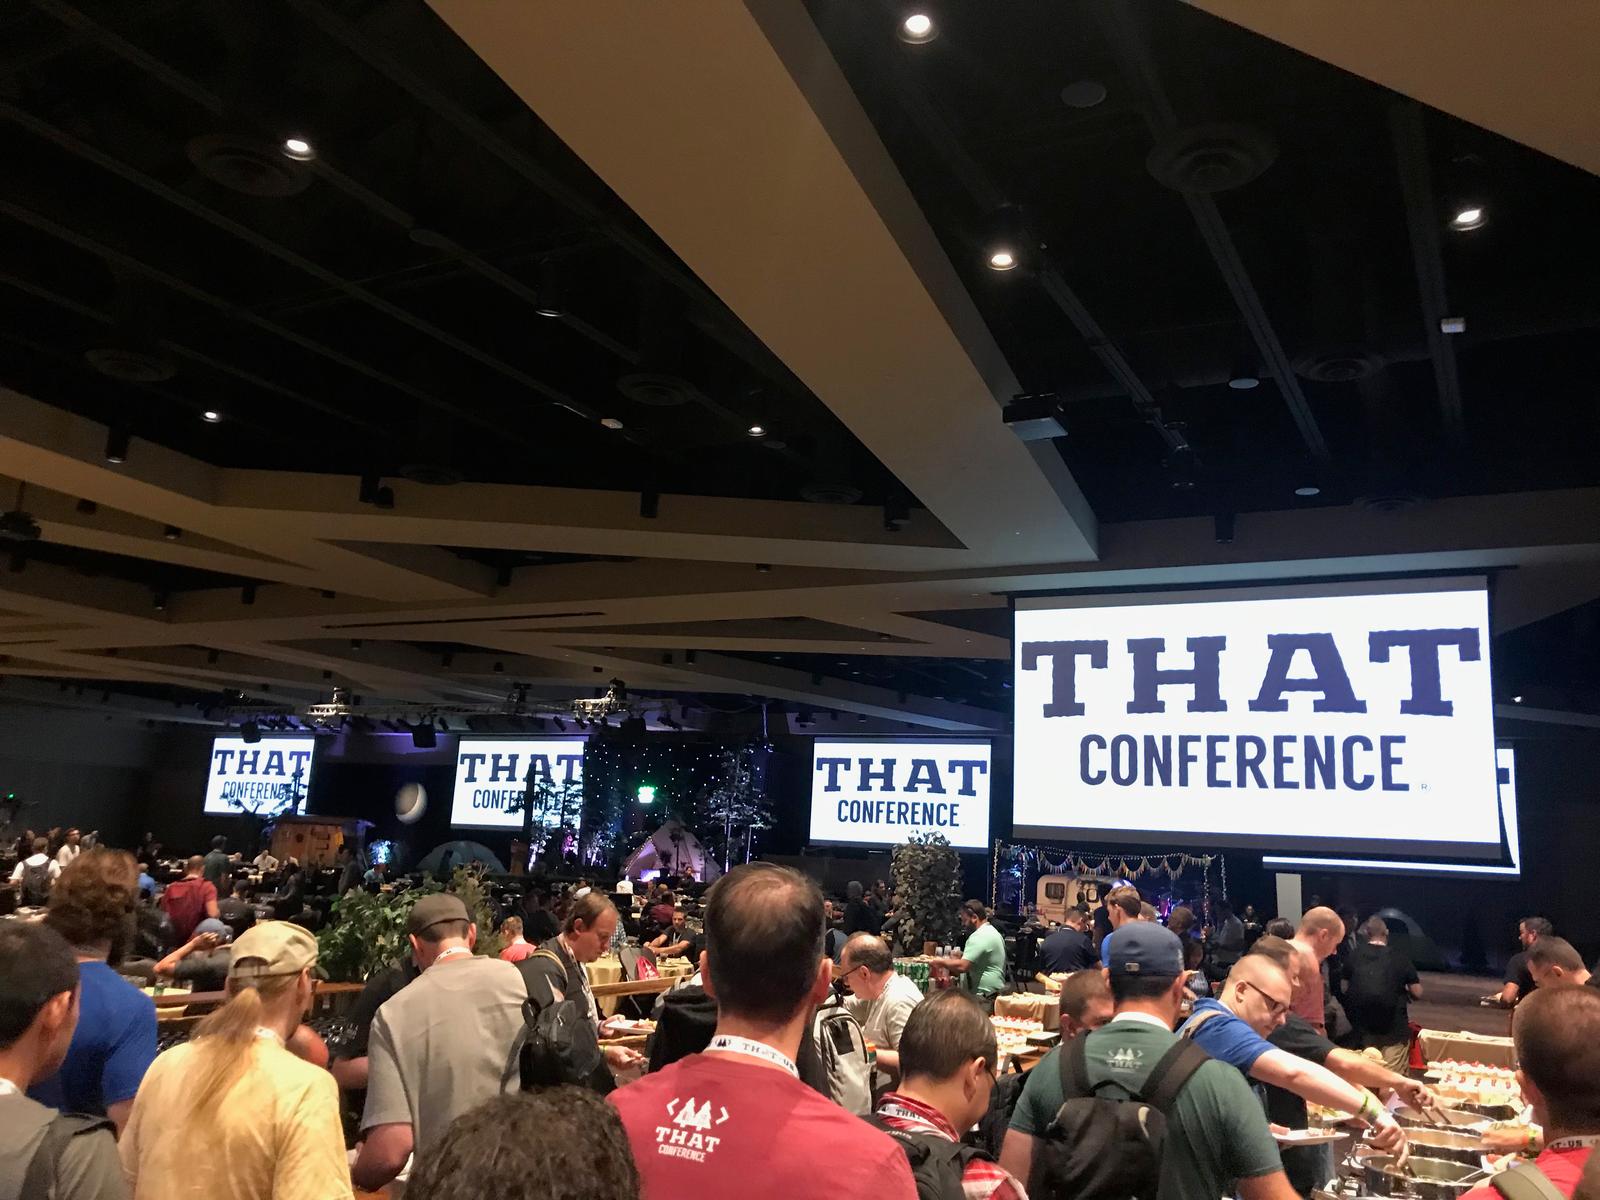 Several attendees stand in line for a meal at THAT conference, the name of the conference is prominently displayed on multiple projectors in the distance.